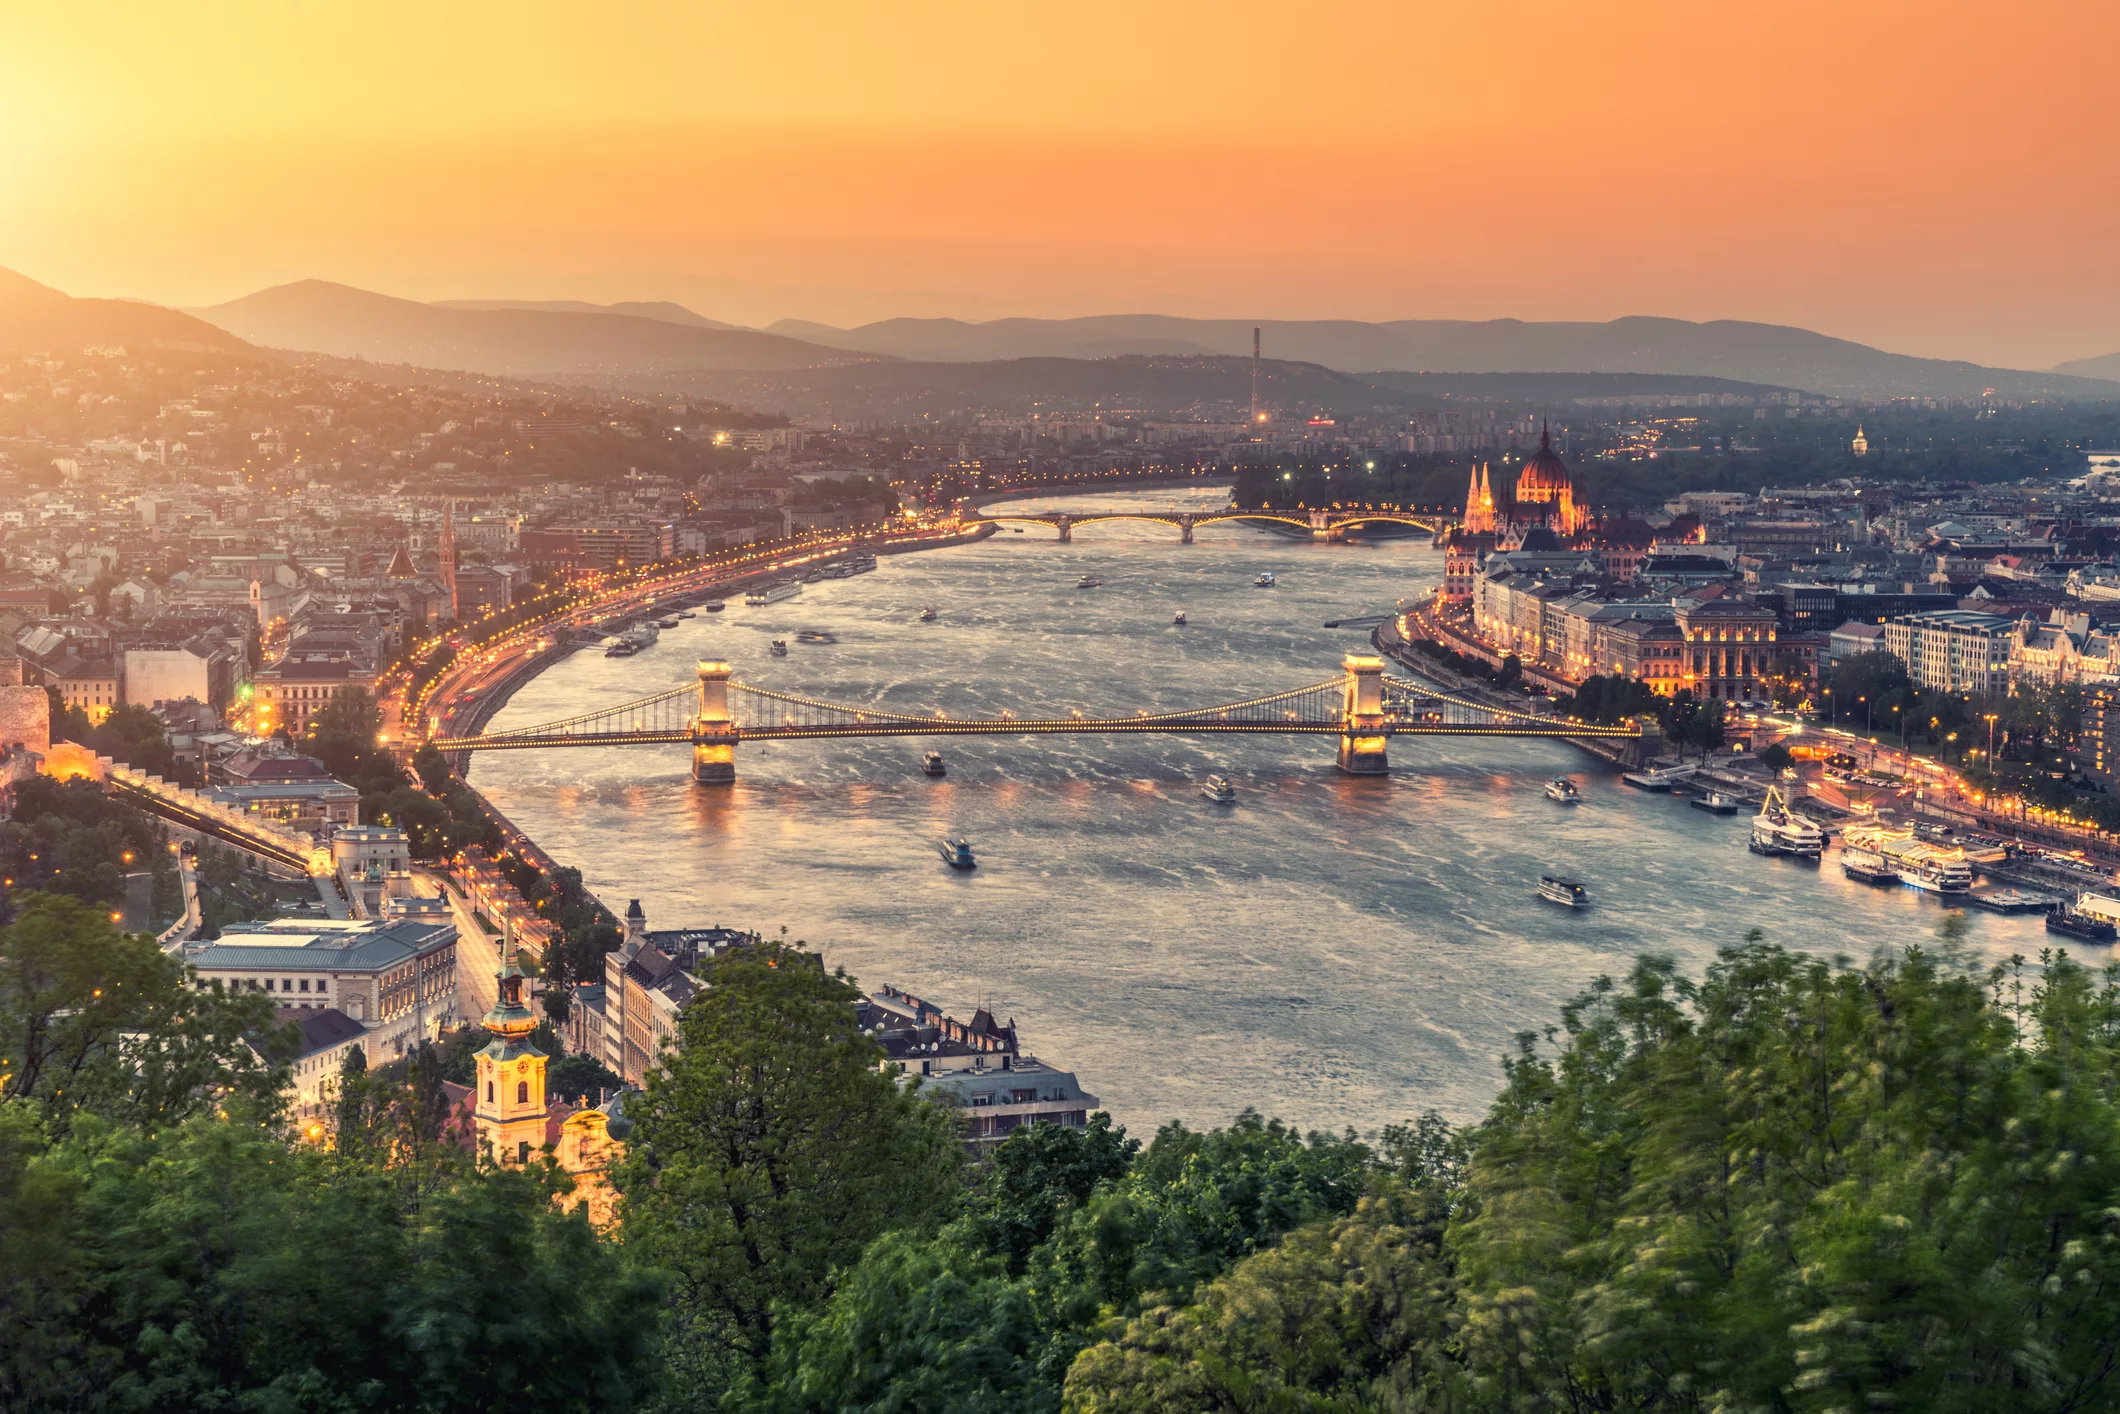 An aerial view of Budapest and the Danube River at sunset